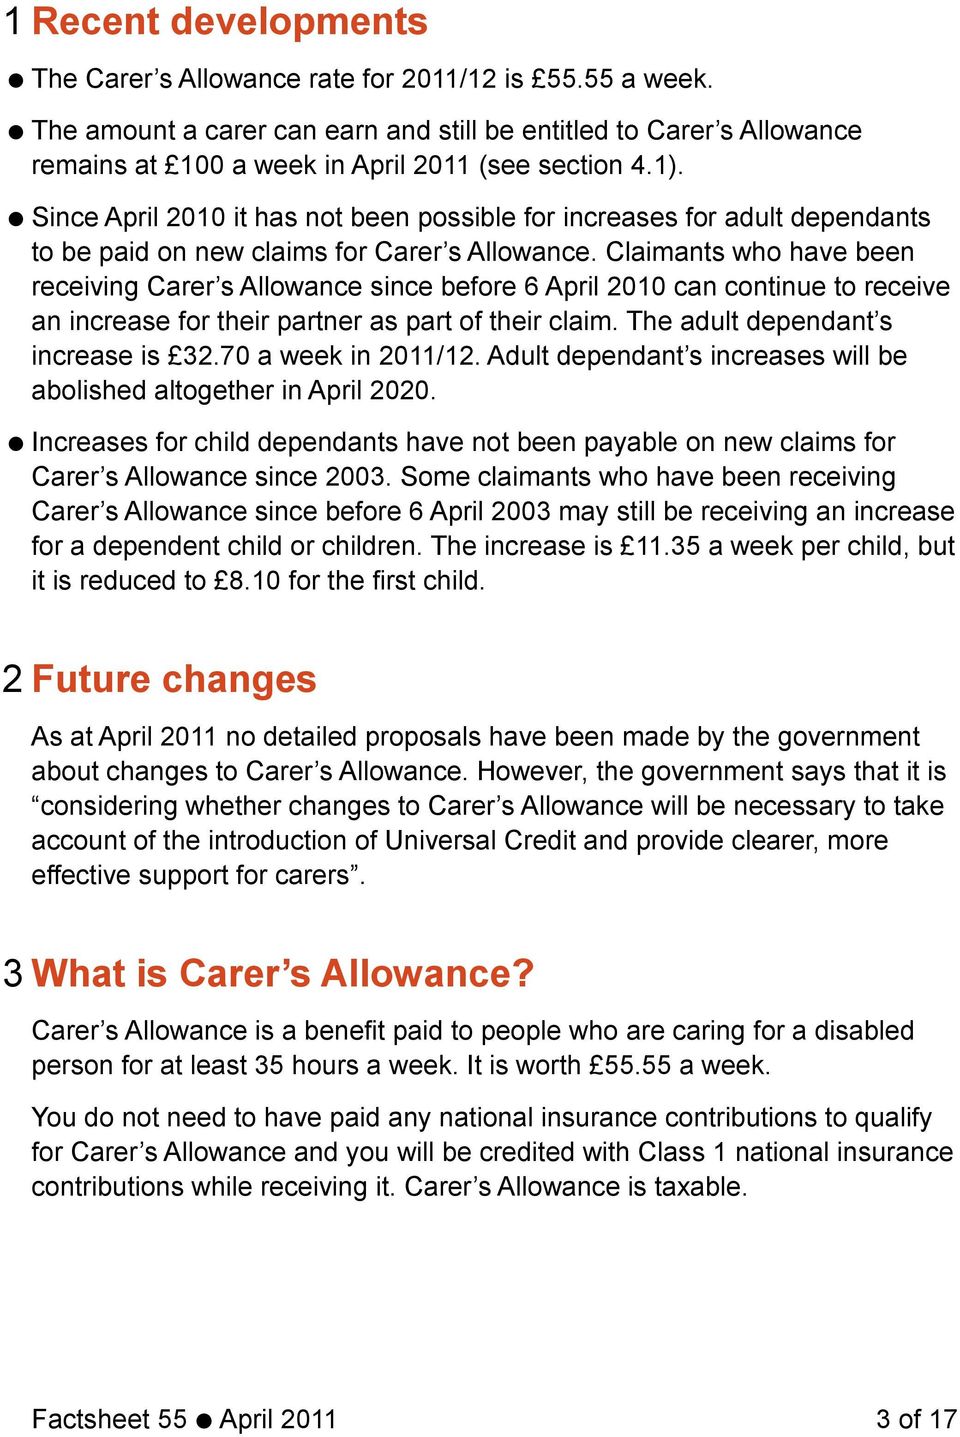 Claimants who have been receiving Carer s Allowance since before 6 April 2010 can continue to receive an increase for their partner as part of their claim. The adult dependant s increase is 32.